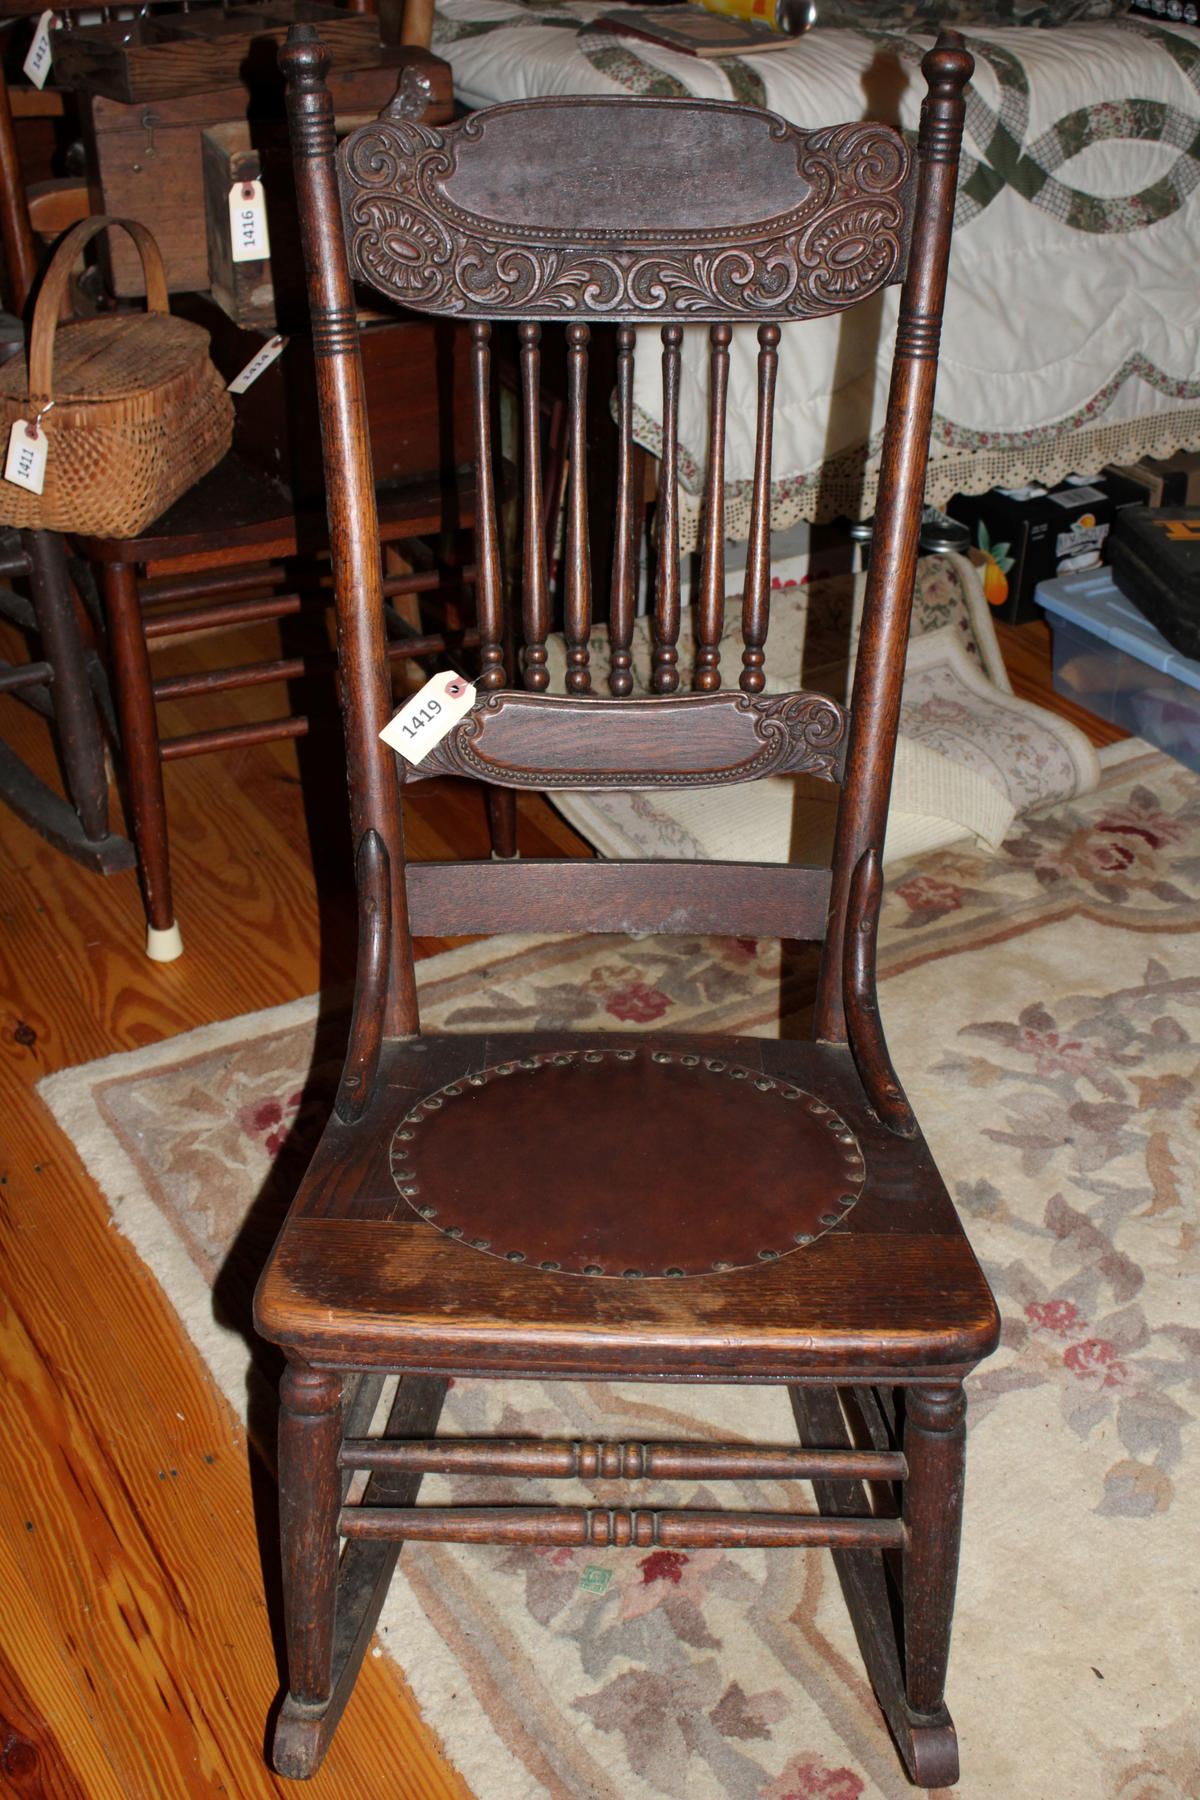 Antique Rocker, leather seat, armless